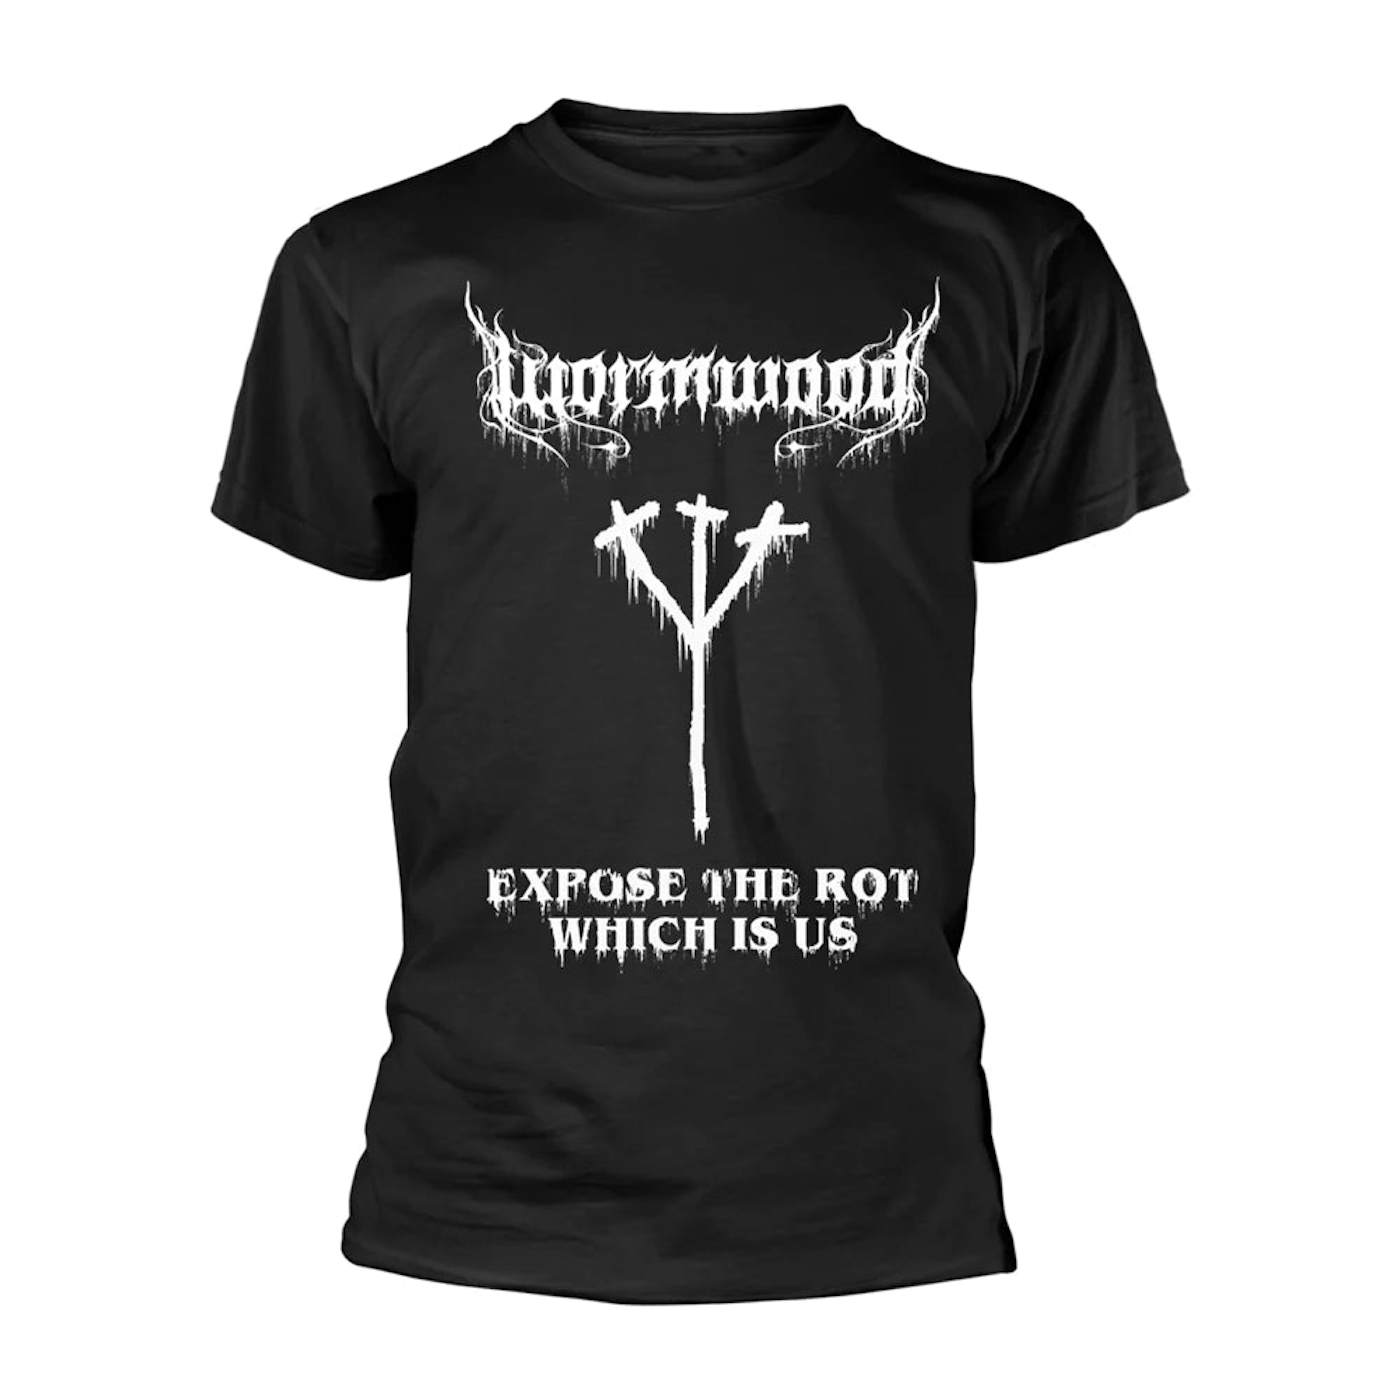 Wormwood T Shirt - Expose The Rot Which Is Us